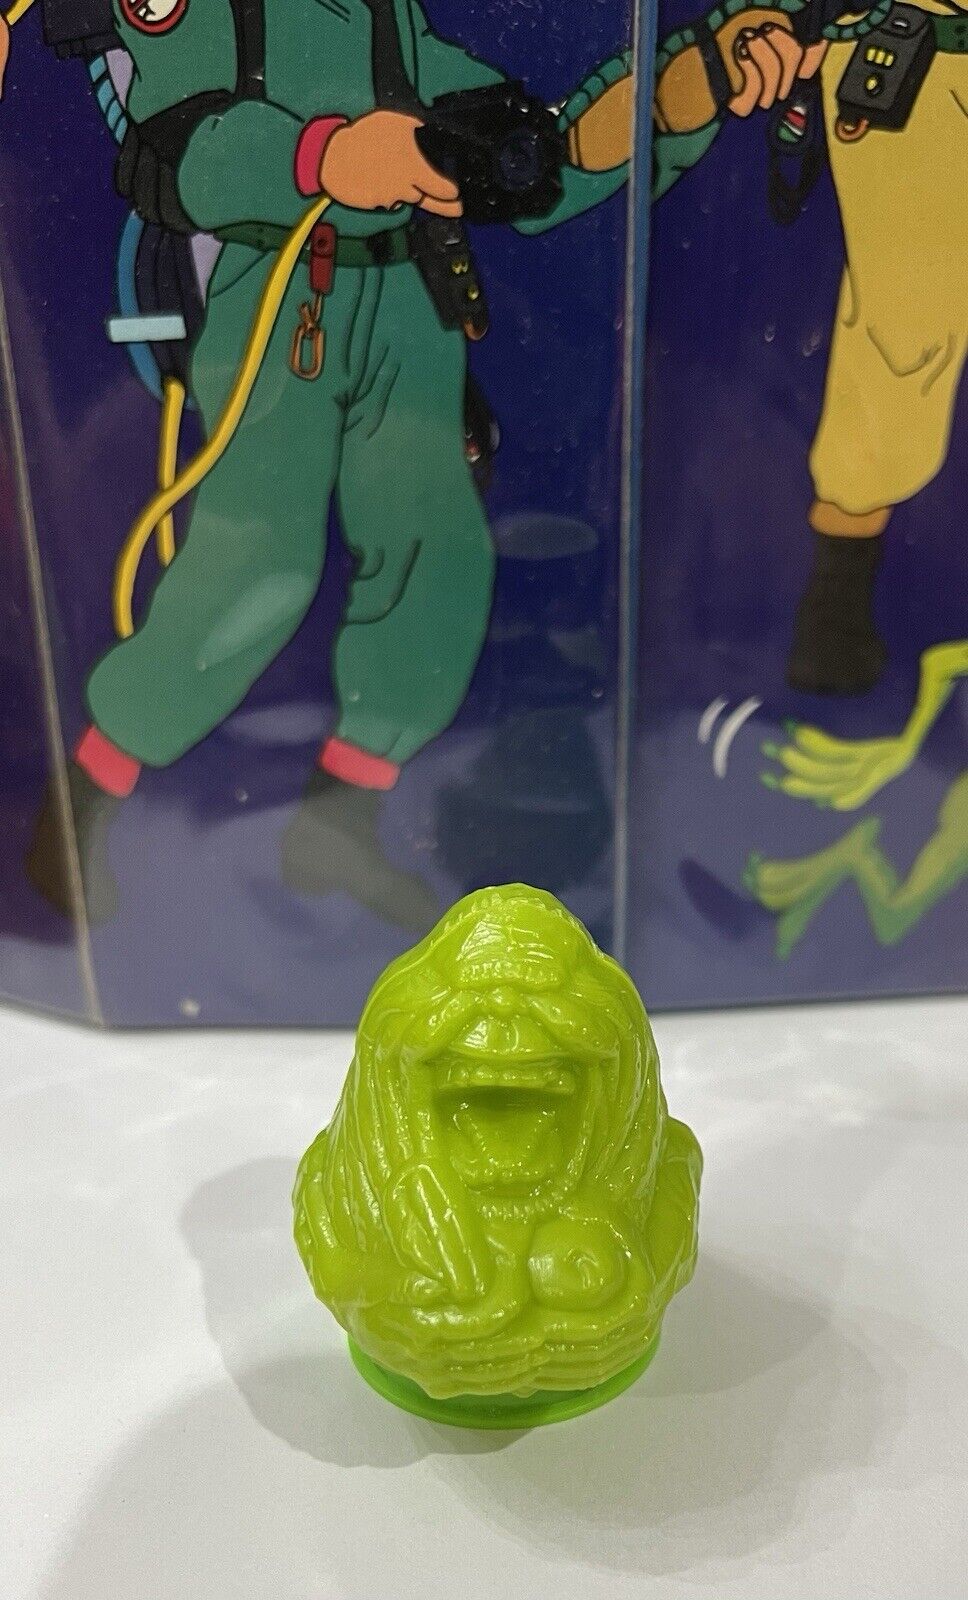 Vintage 1989 Topps SLIMER Candy Container 2.5” GREEN Bubble Gum GHOSTBUSTERS - A